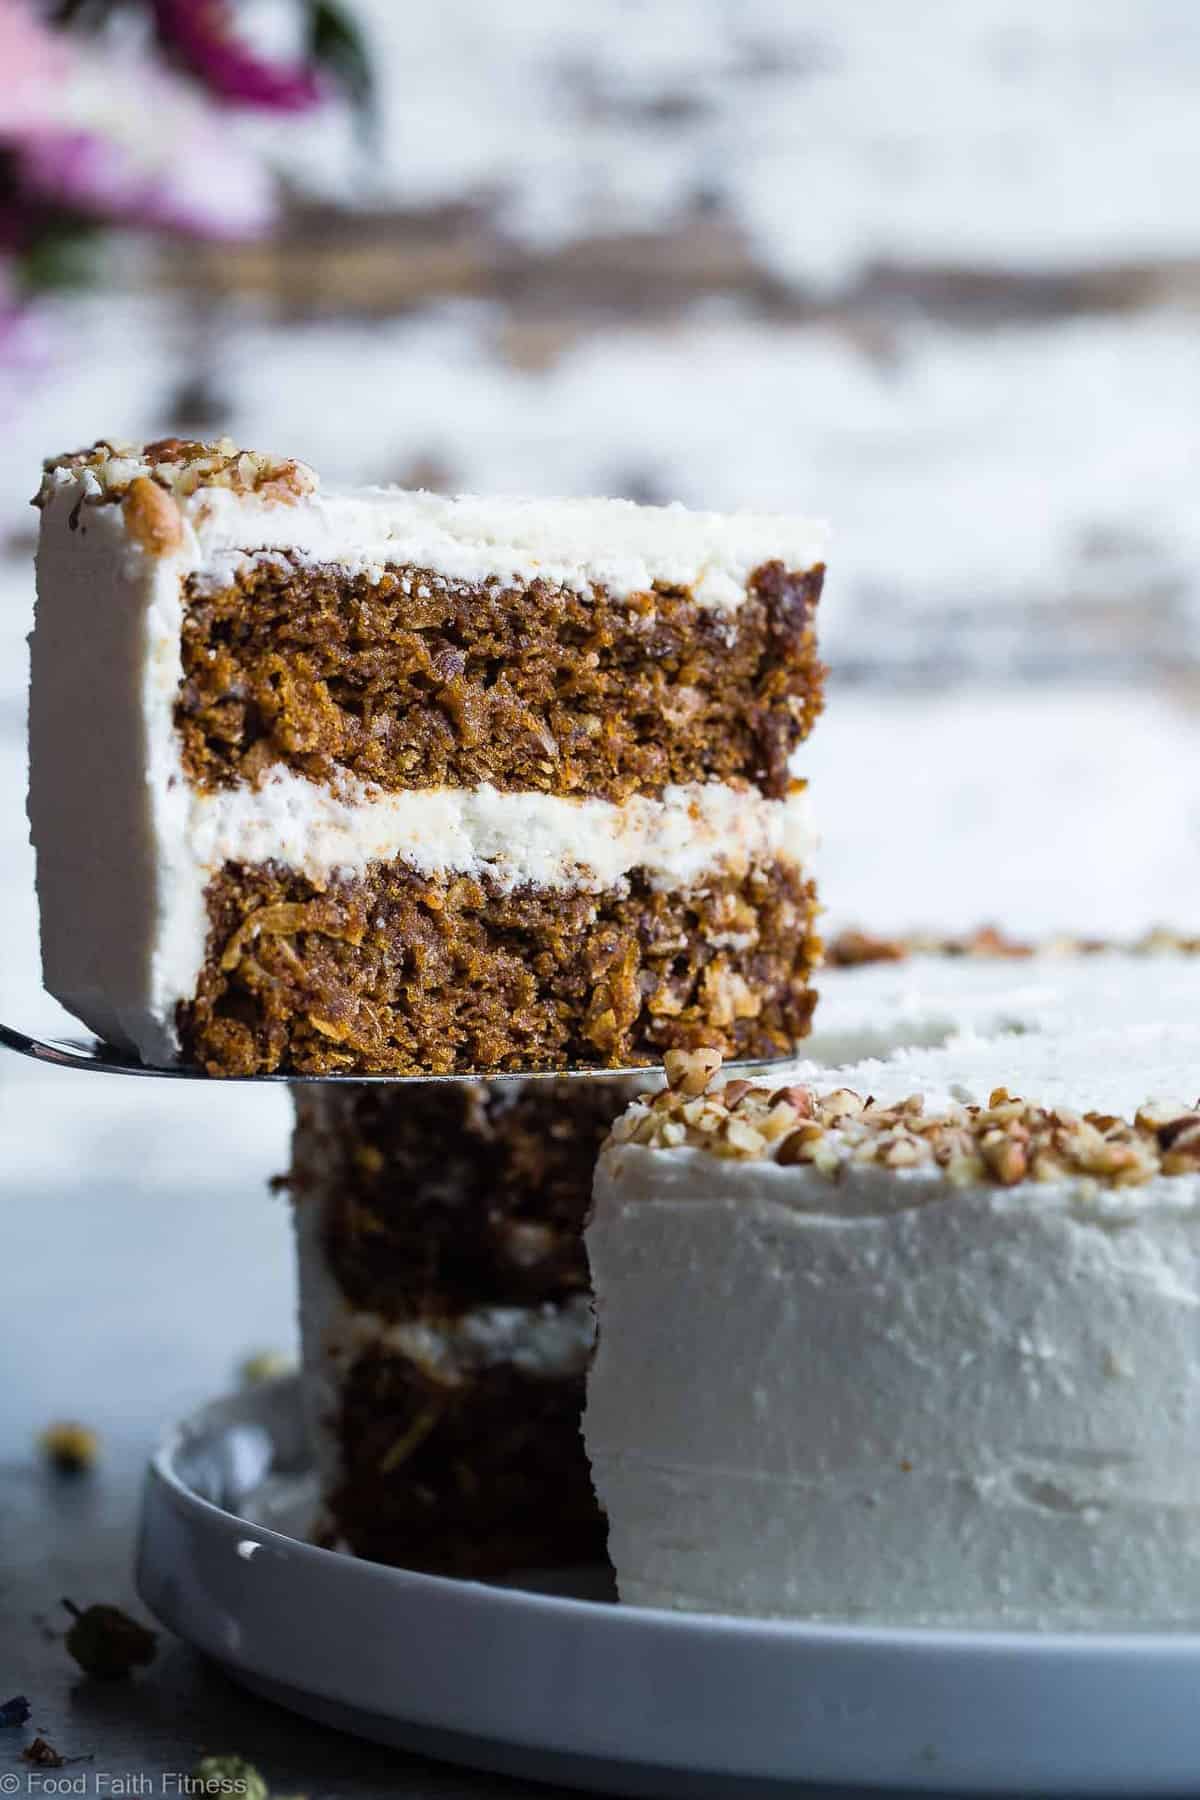 The BEST Gluten Free Vegan Carrot Cake - This one bowl, healthy carrot cake is SO moist and tender, you'll never know it's plant based, made without eggs and is gluten/grain/dairy/refined sugar free! Perfect for Easter! | #Foodfaitfitness | #Vegan #Easter #Glutenfree #DairyFree #Carrotcake